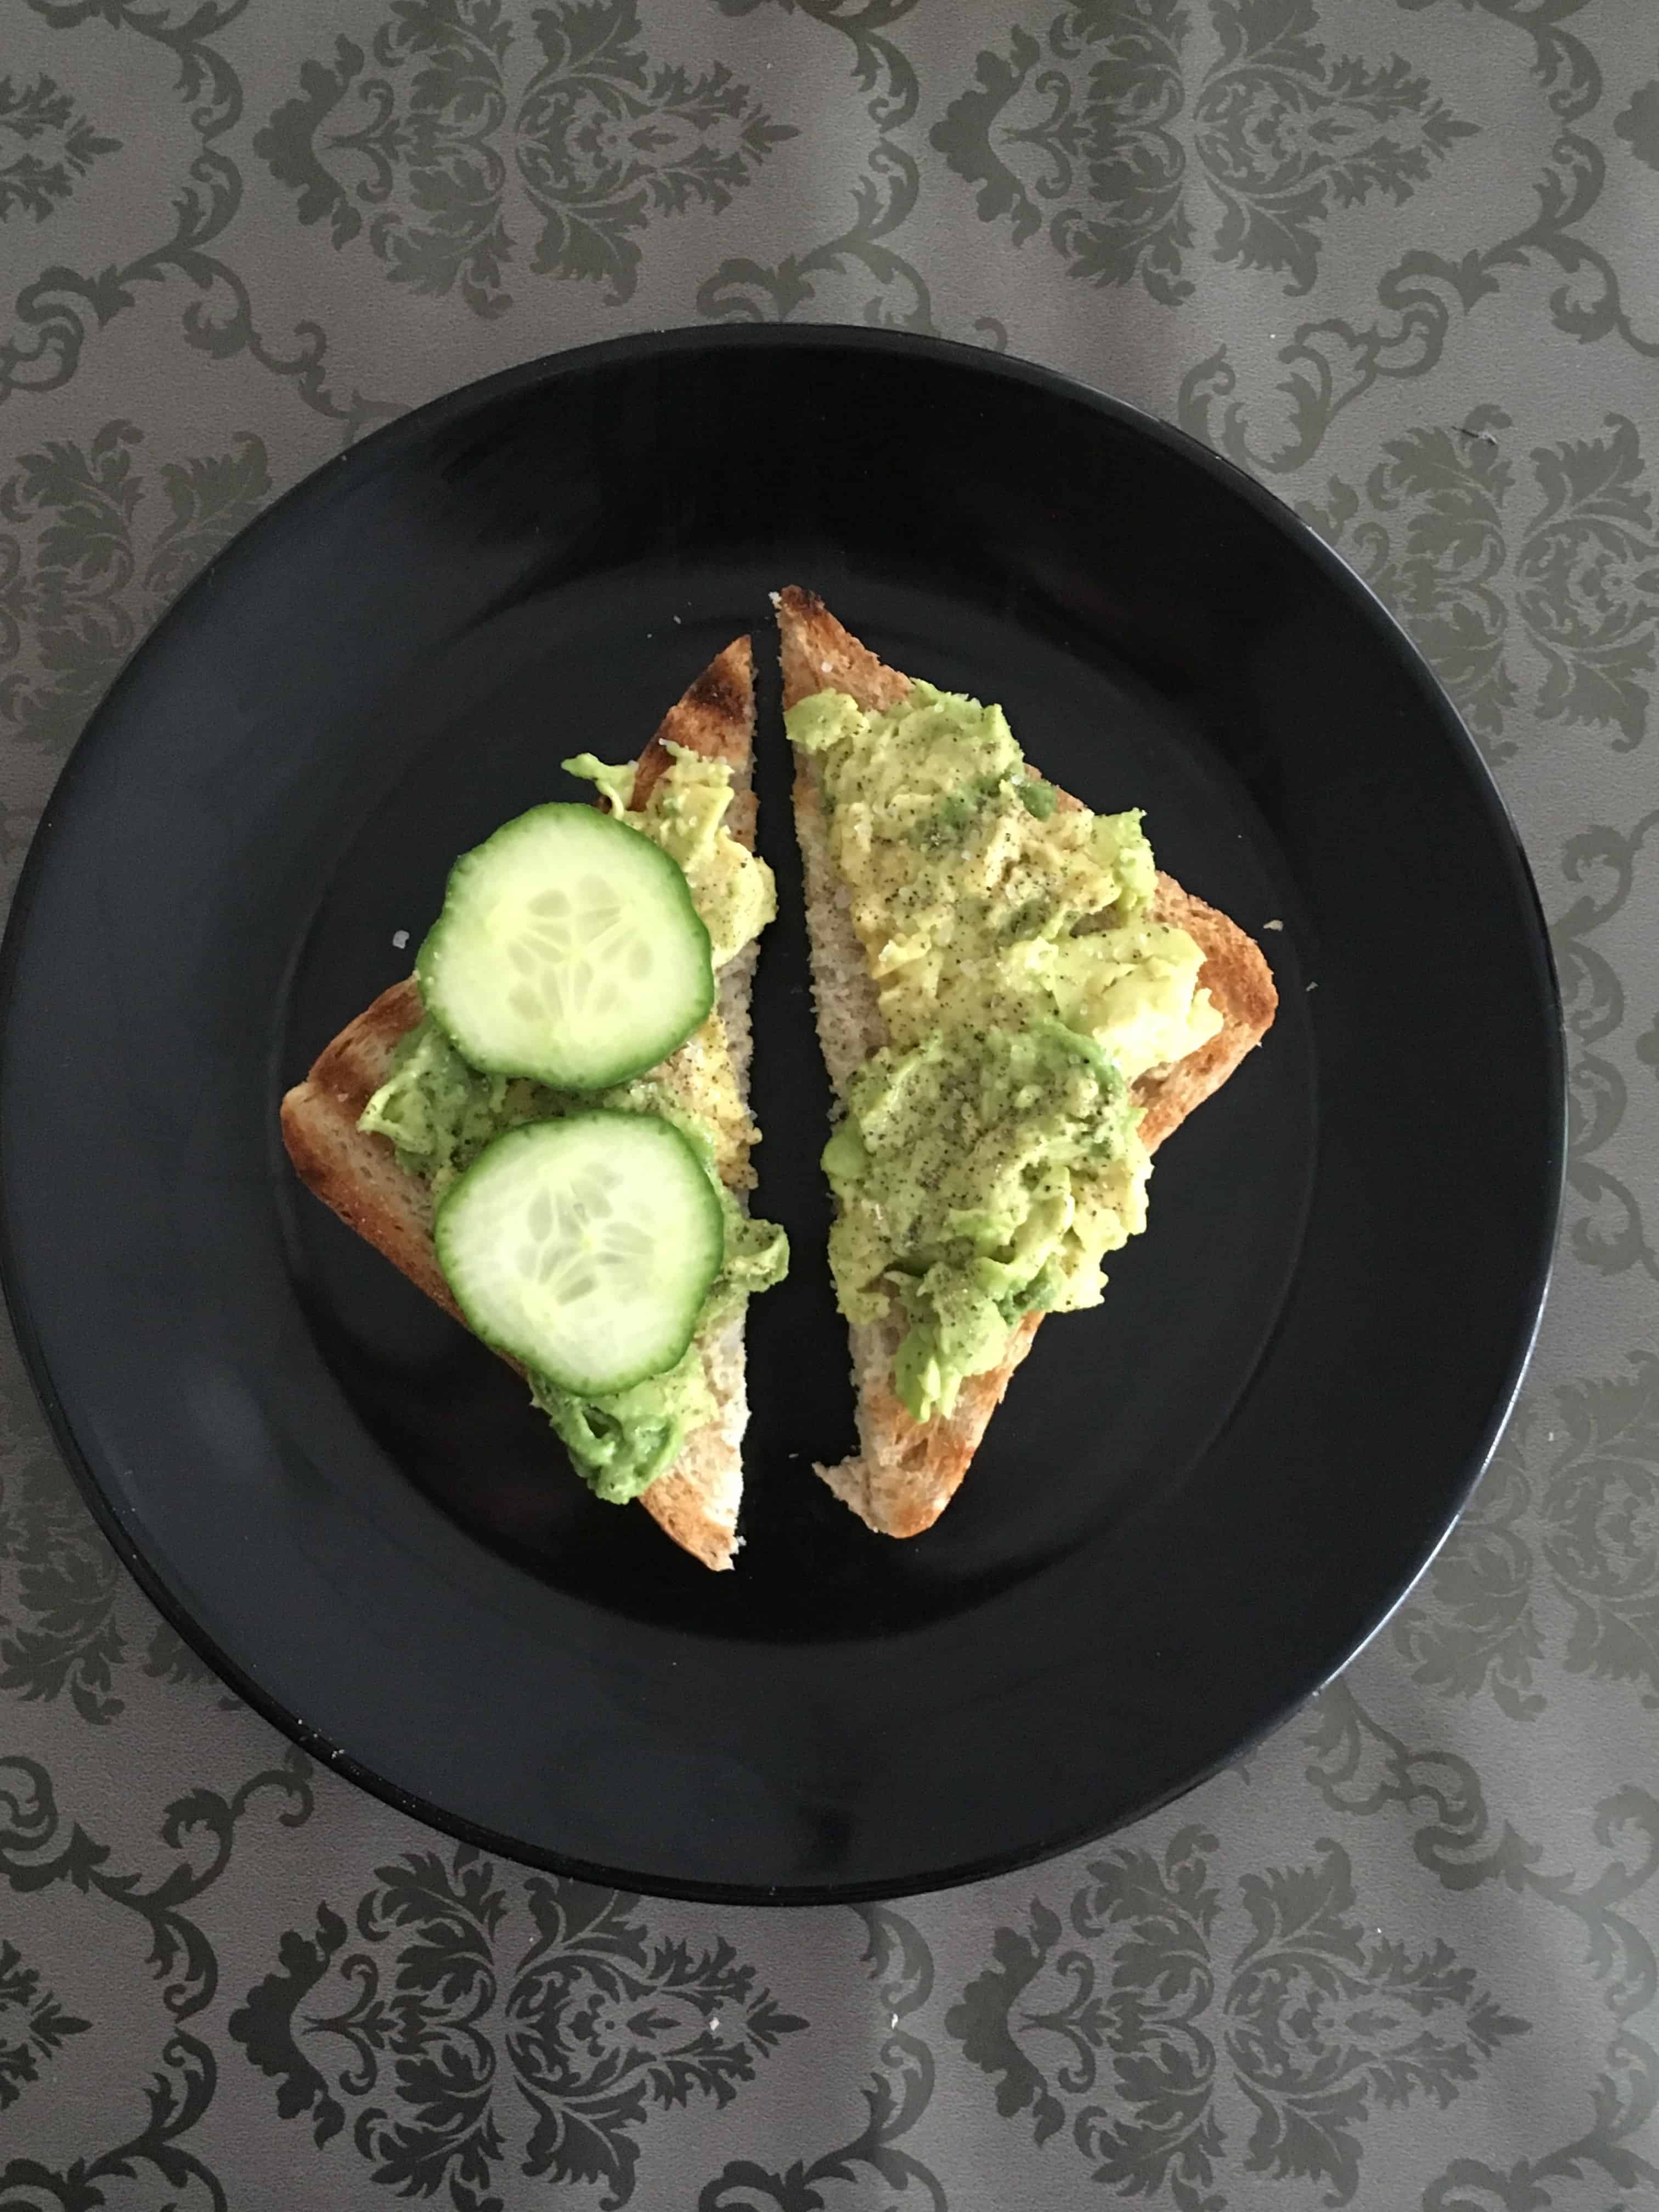 Avocado toast in the making